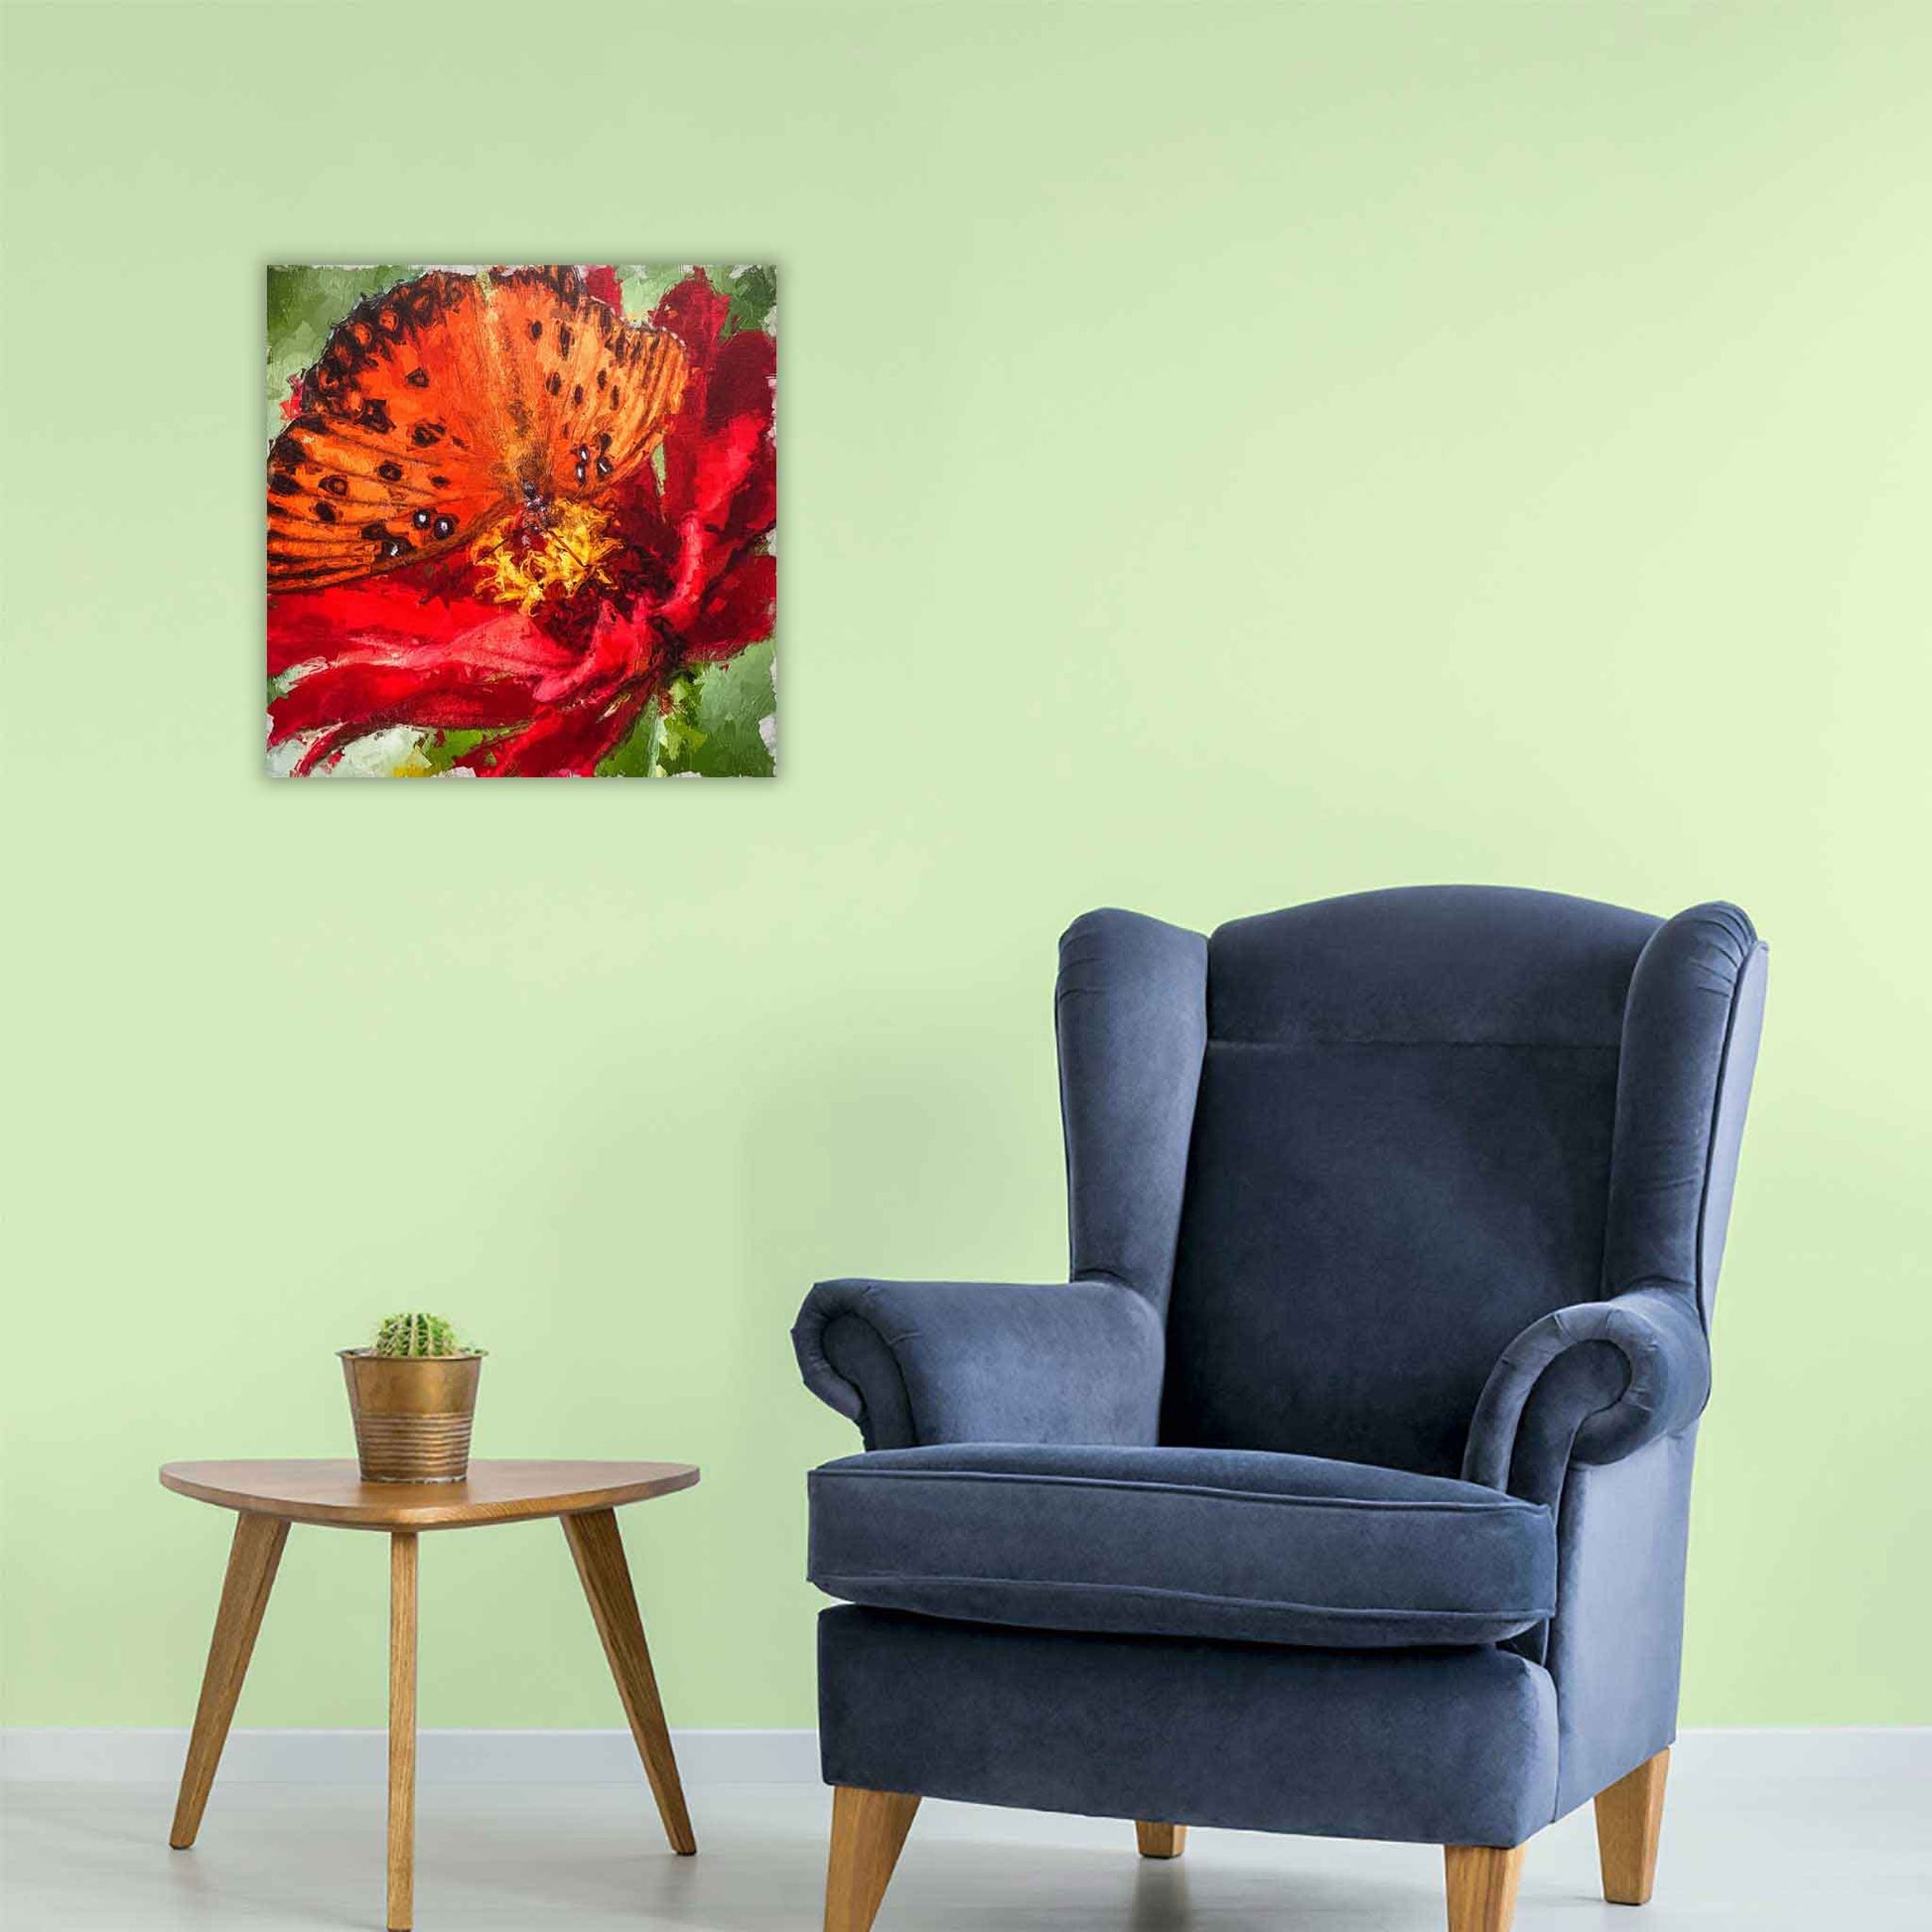 ECC Garden Beauties Framed 12 x 12 inch Canvas Print by Photographer Claire Closson..  Warm reds and Oranges contrast with a green backdrop.  Measures 12" x 12".  Printed on canvas in a painterly style it will liven up  your space.  